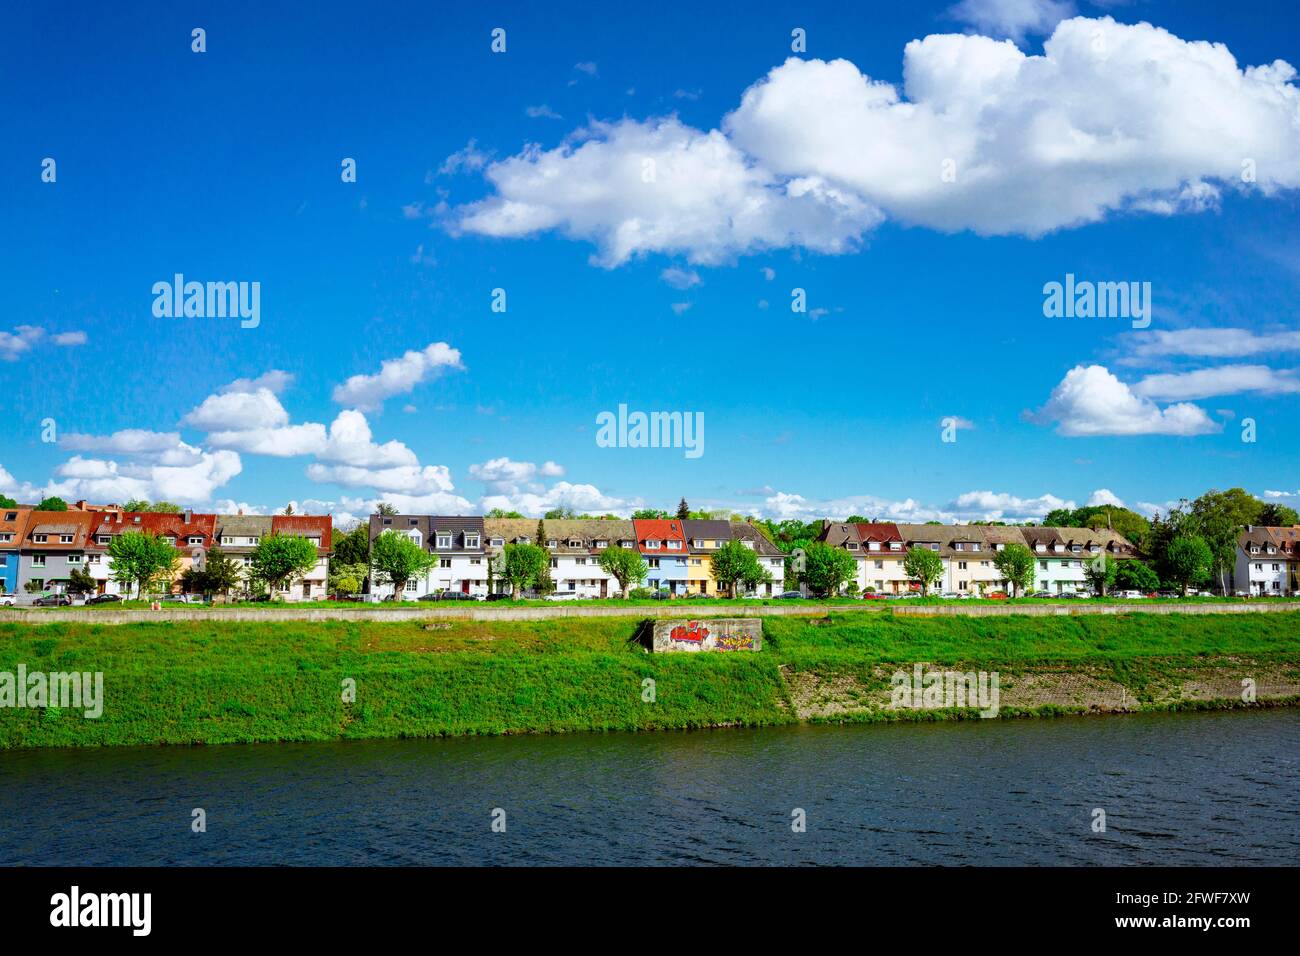 Parkinsel quarter in Ludwigshafen Germany. The upscale quarter has gained new popuarity with new housing projects in recent years. Stock Photo